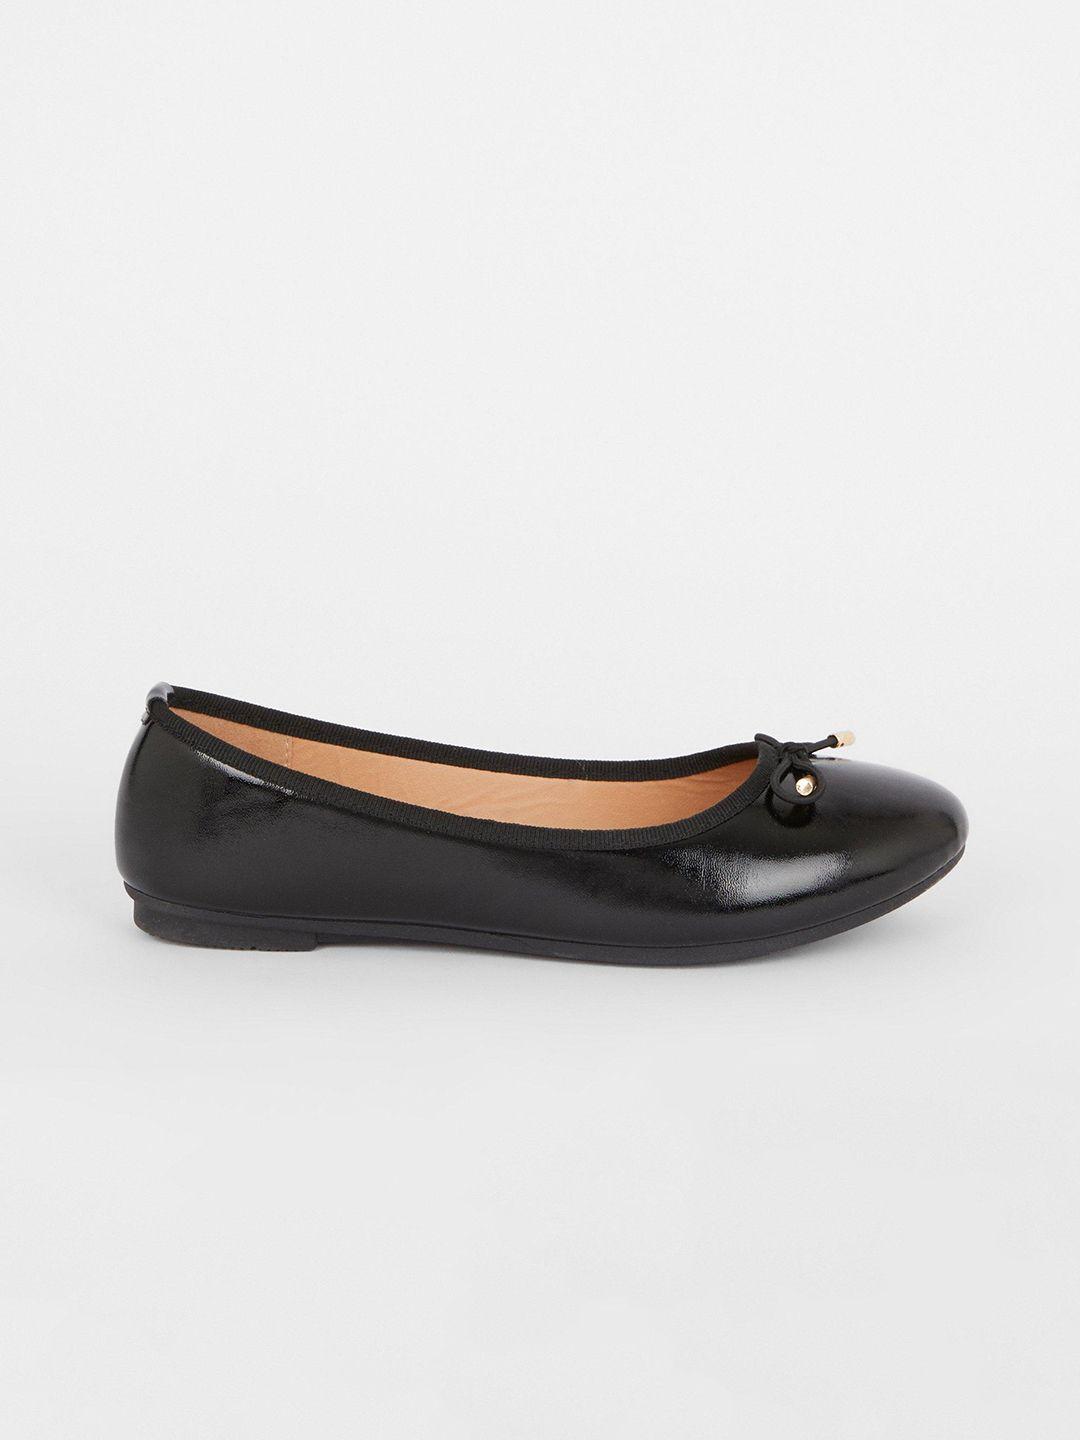 dorothy perkins women ballerinas with bow detail